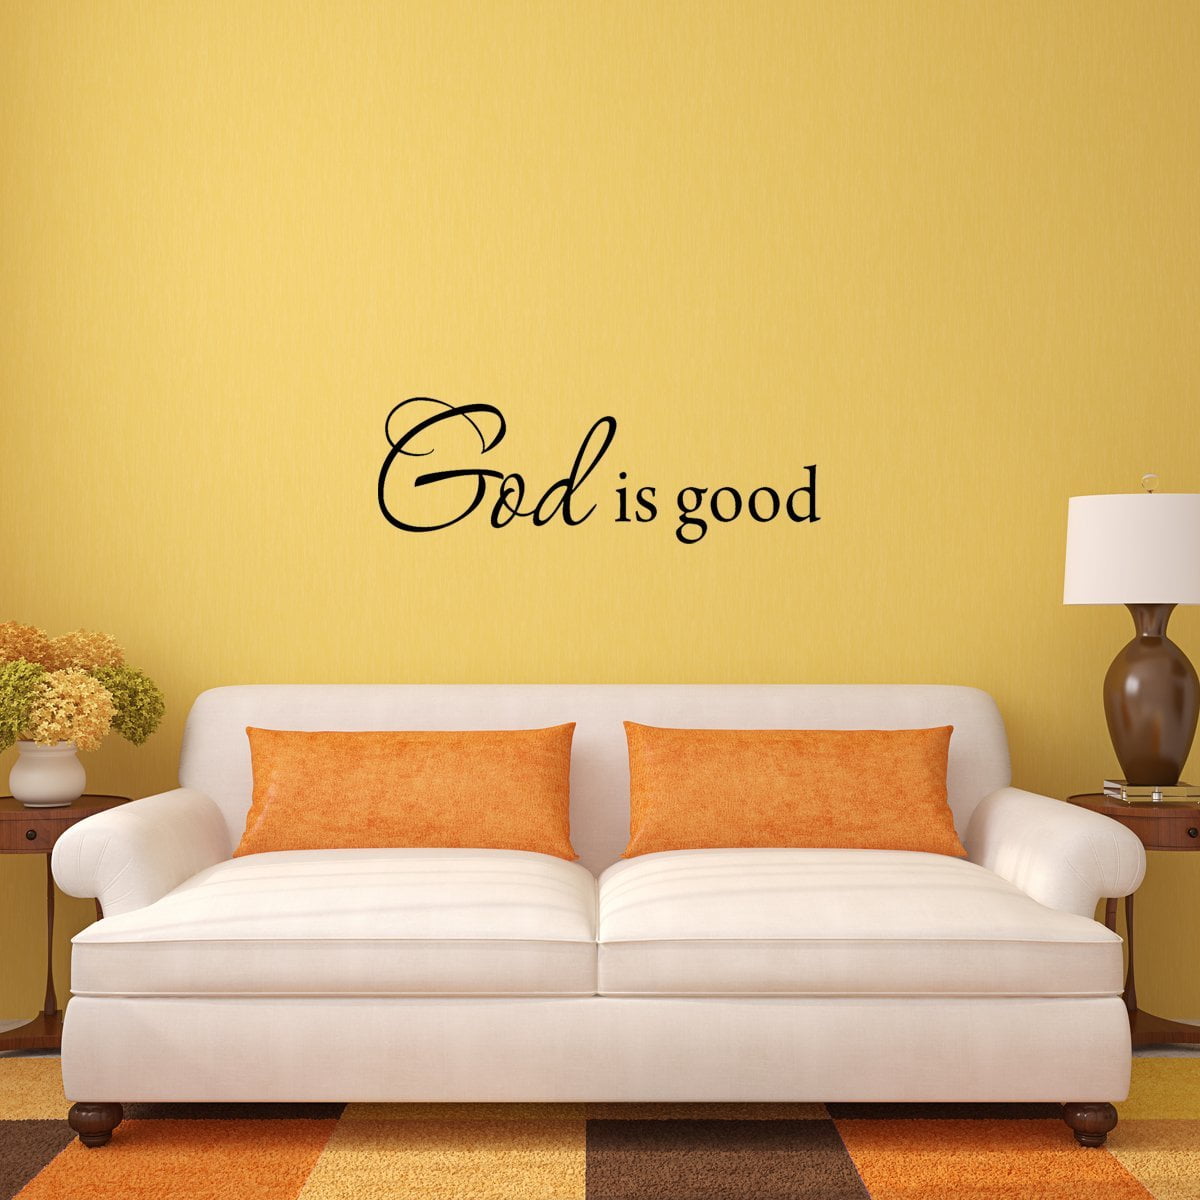 Details about   Time Positive Life Motivation Quotes Vinyl Wall Art Sticker Home Room Decals 